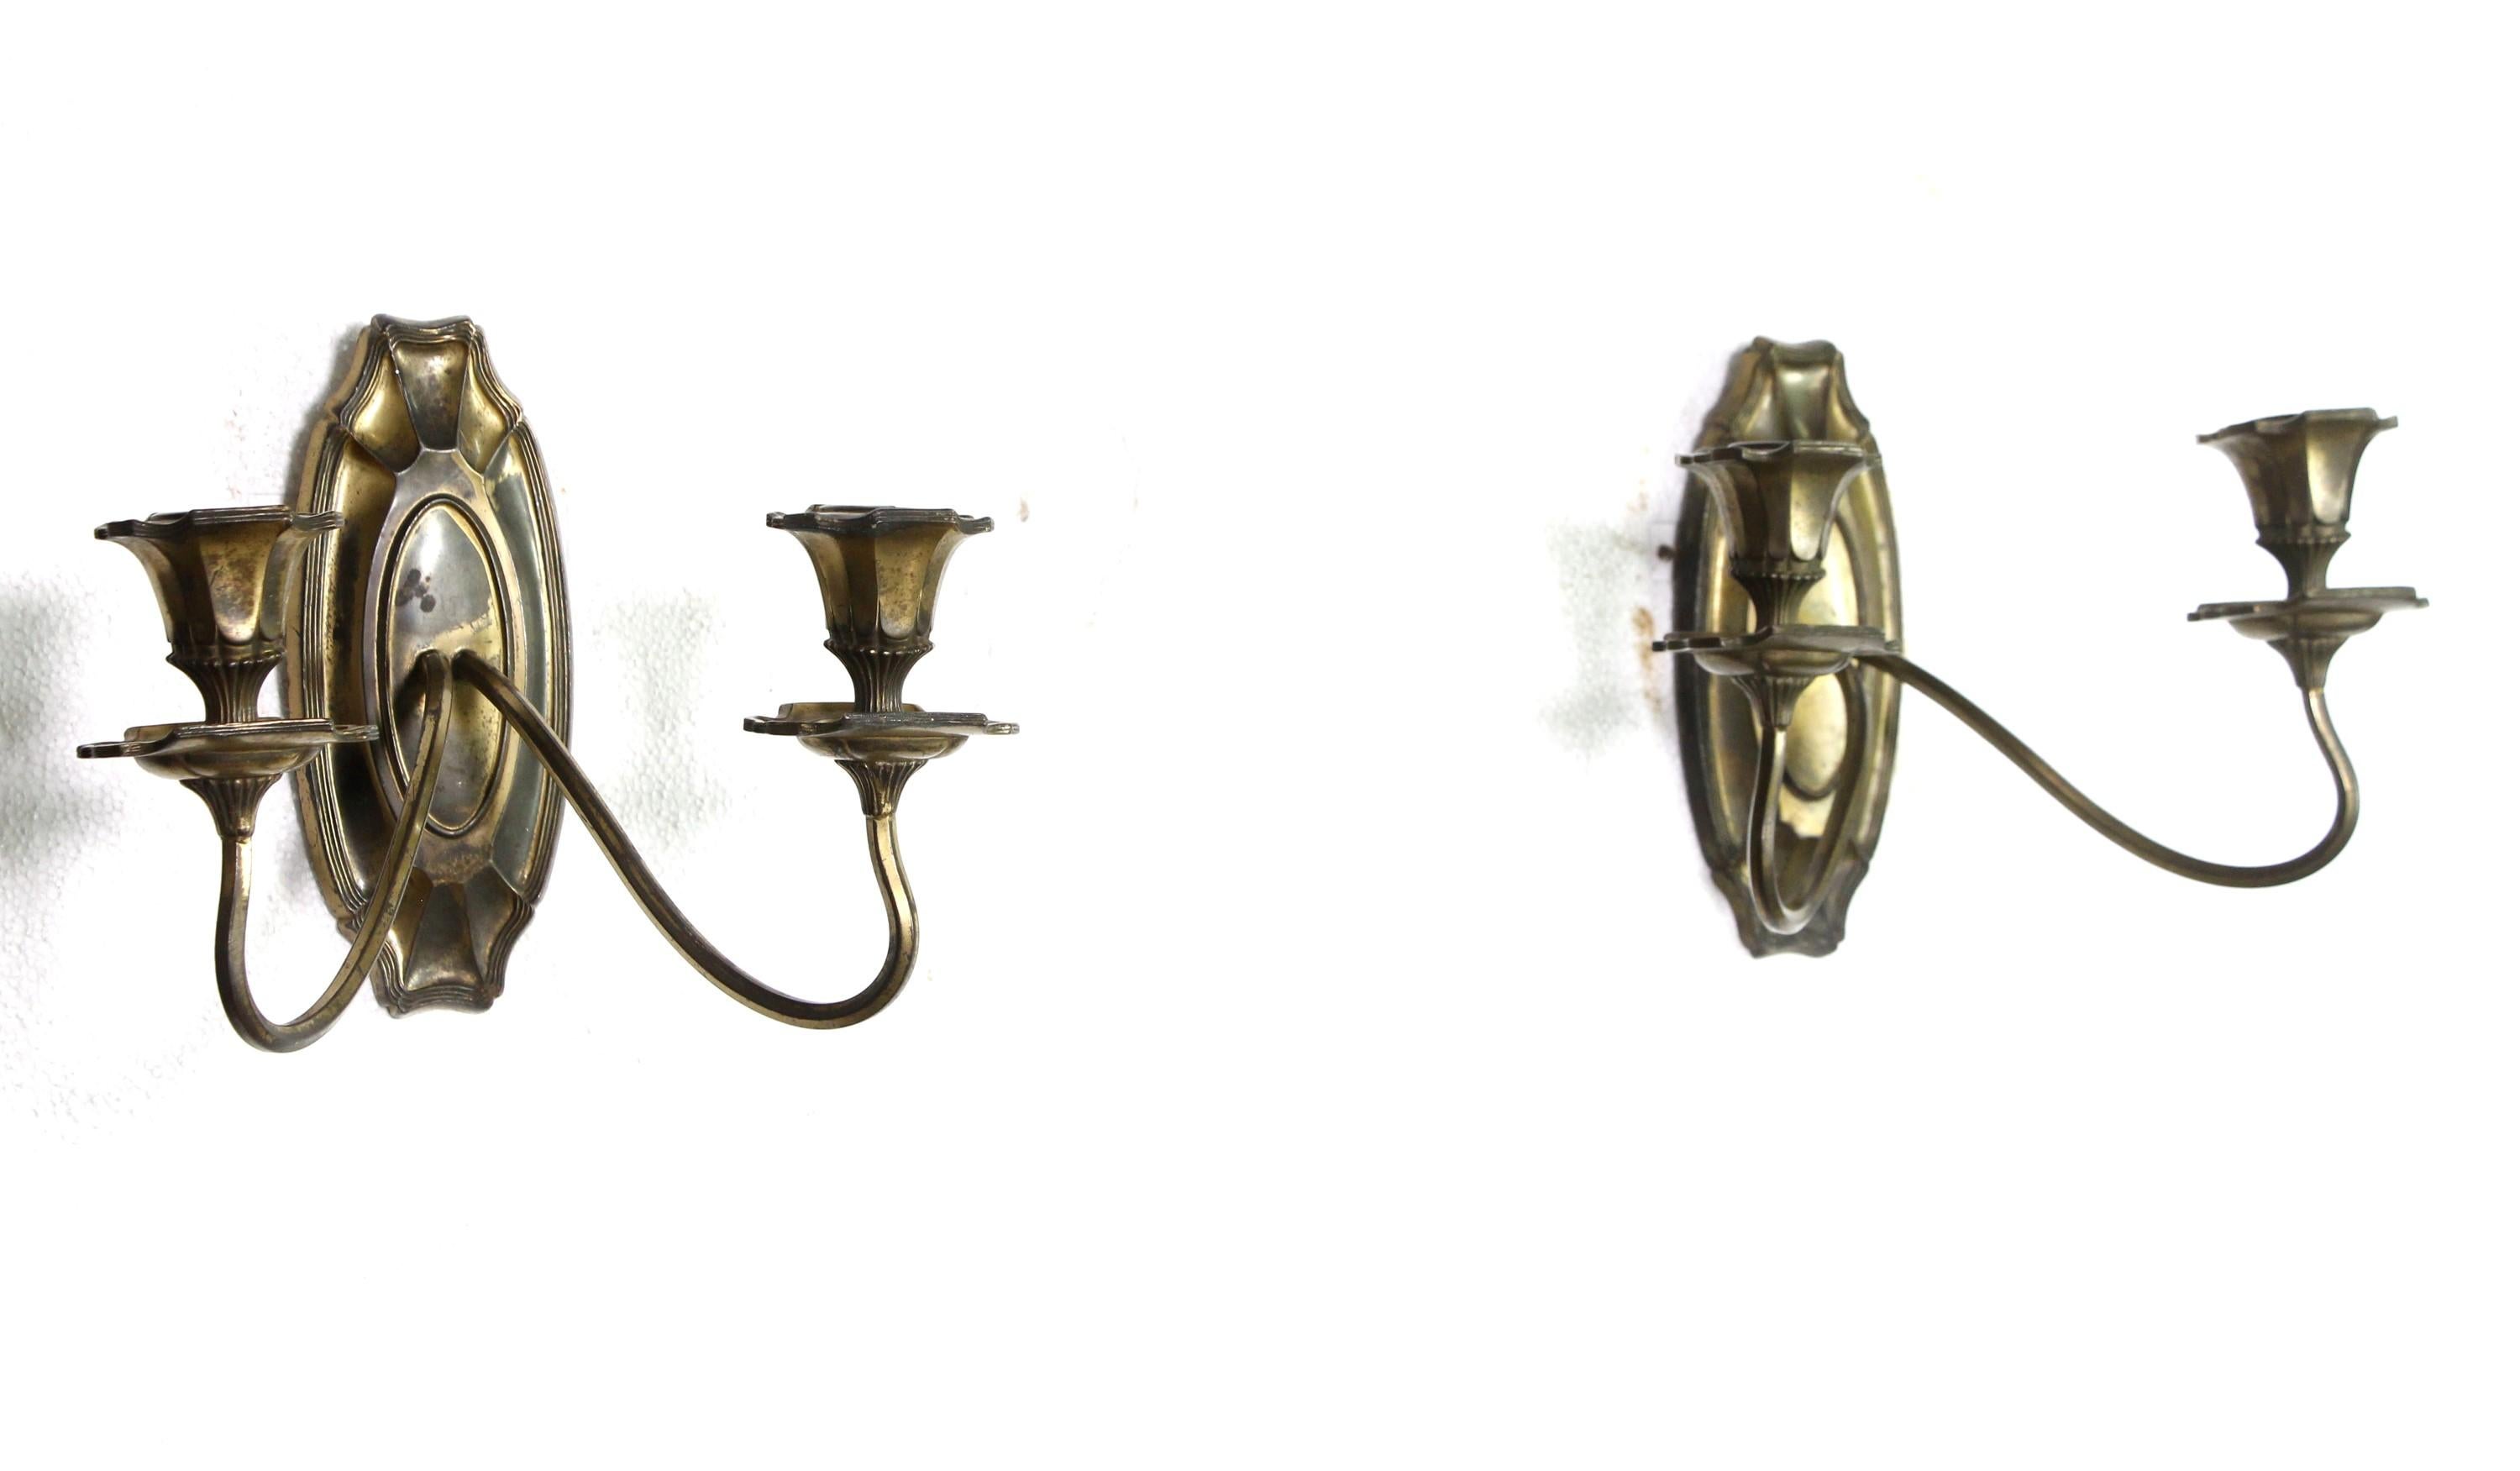 American made two arm sconces fashioned out of silvered bronze and presented in an Art Nouveau style from the late 19th century. Priced as is with light cleaning. If you would like this electrified, please email for a quote. Priced as a pair. Please